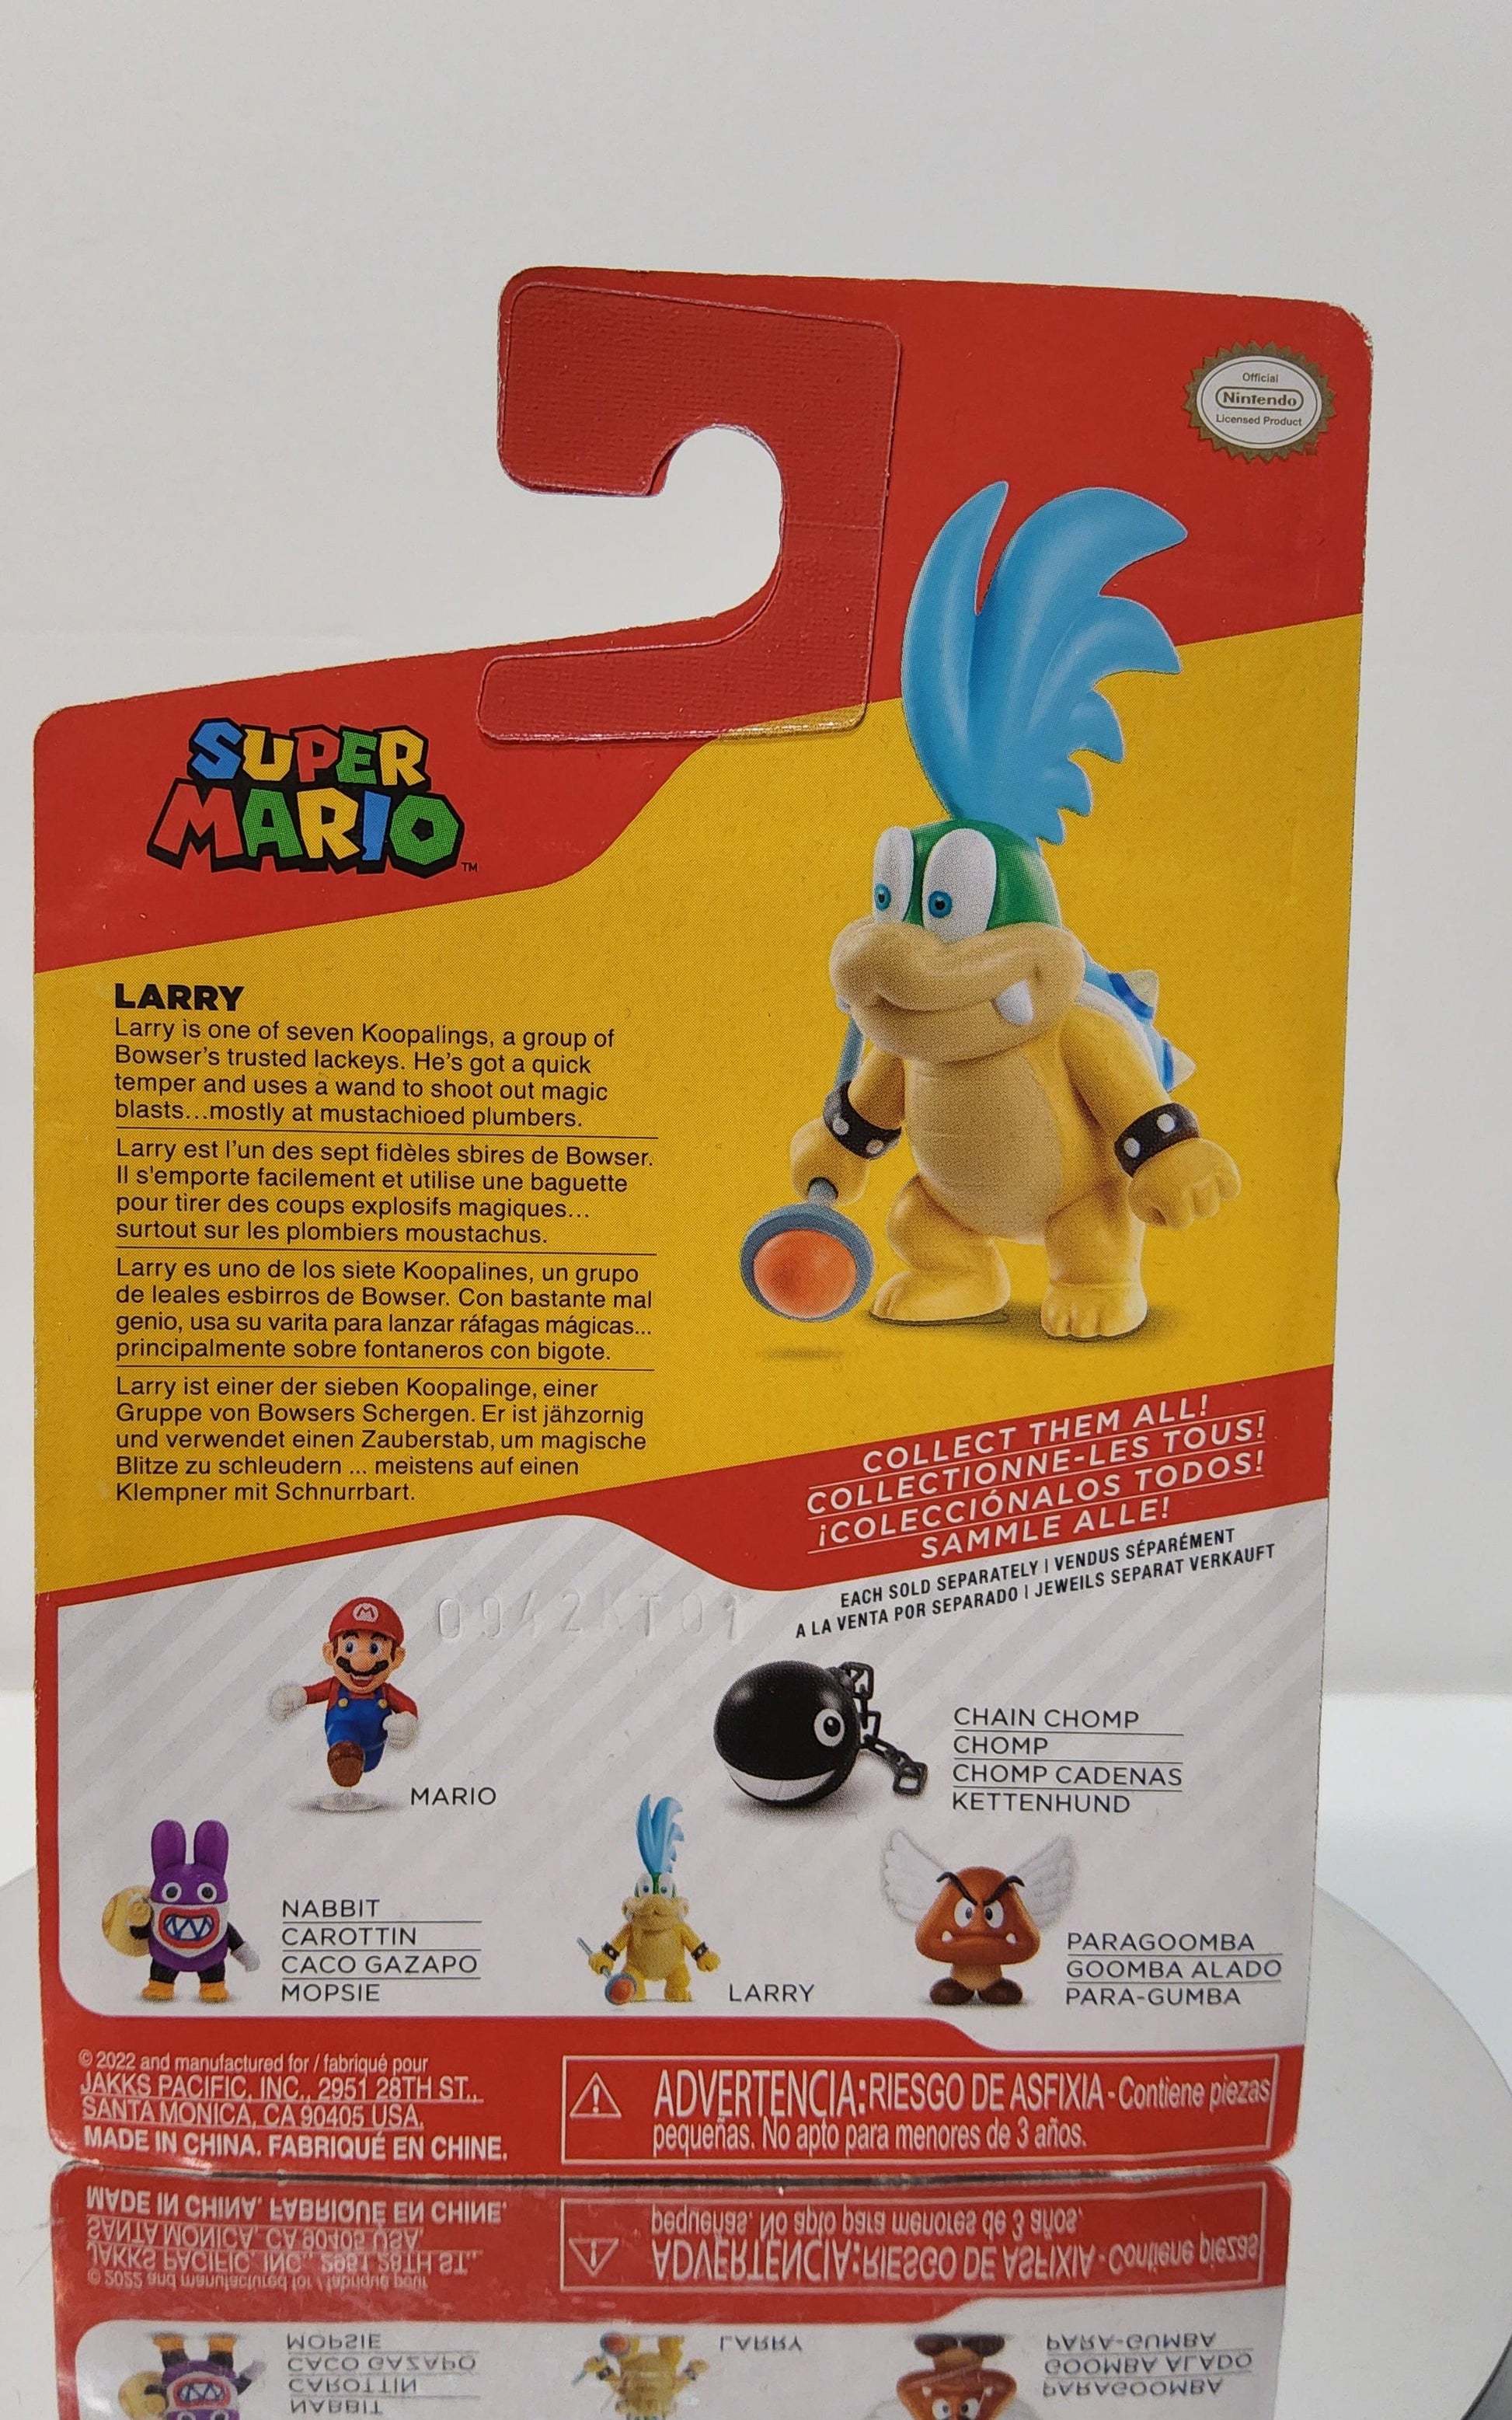 Larry Super Mario Brothers 2.5" Action Figure - Logan's Toy Chest